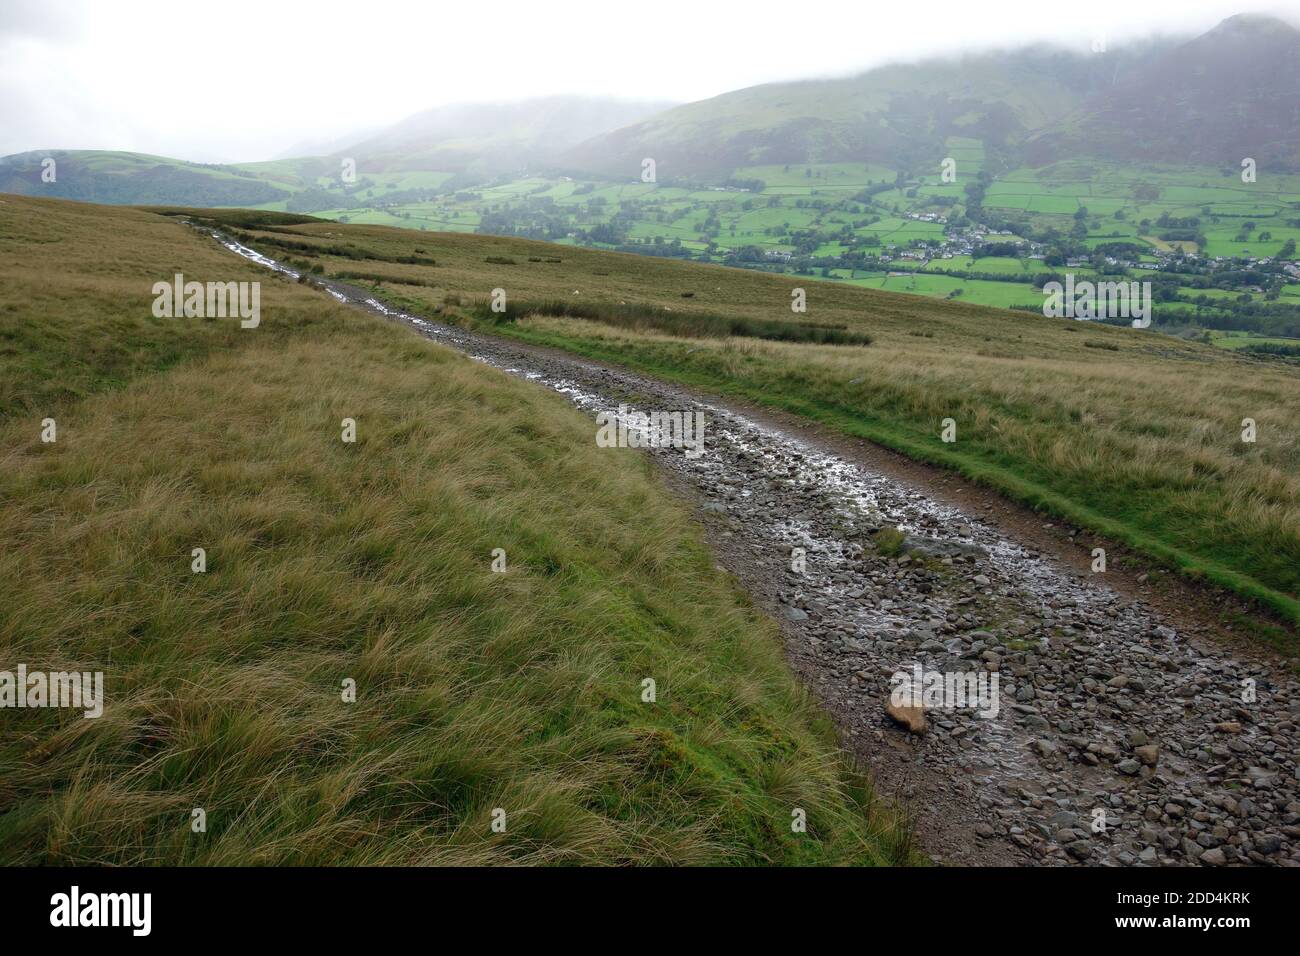 The Old Coach Road to Dockray in Matterdale via Hausewell Brow in the Lake District National Park, Cumbria, England, UK. Stock Photo